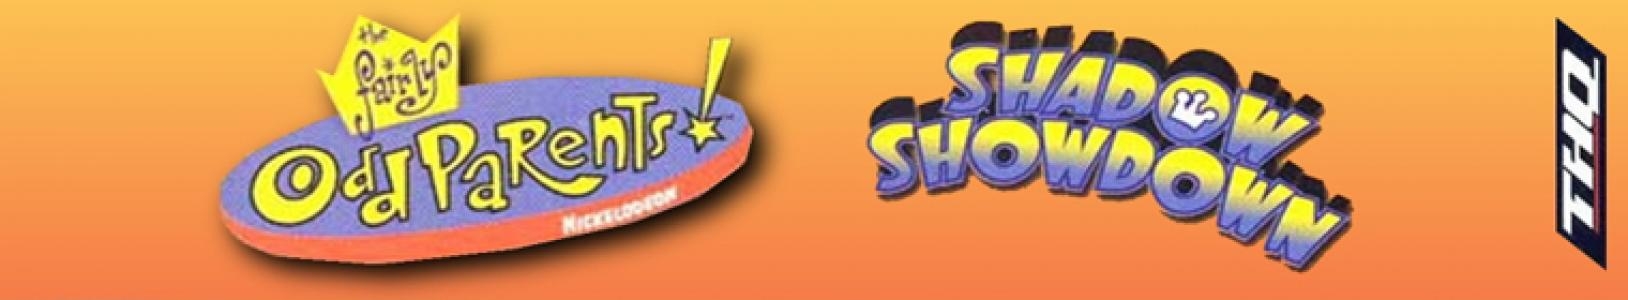 The Fairly OddParents! Shadow Showdown banner